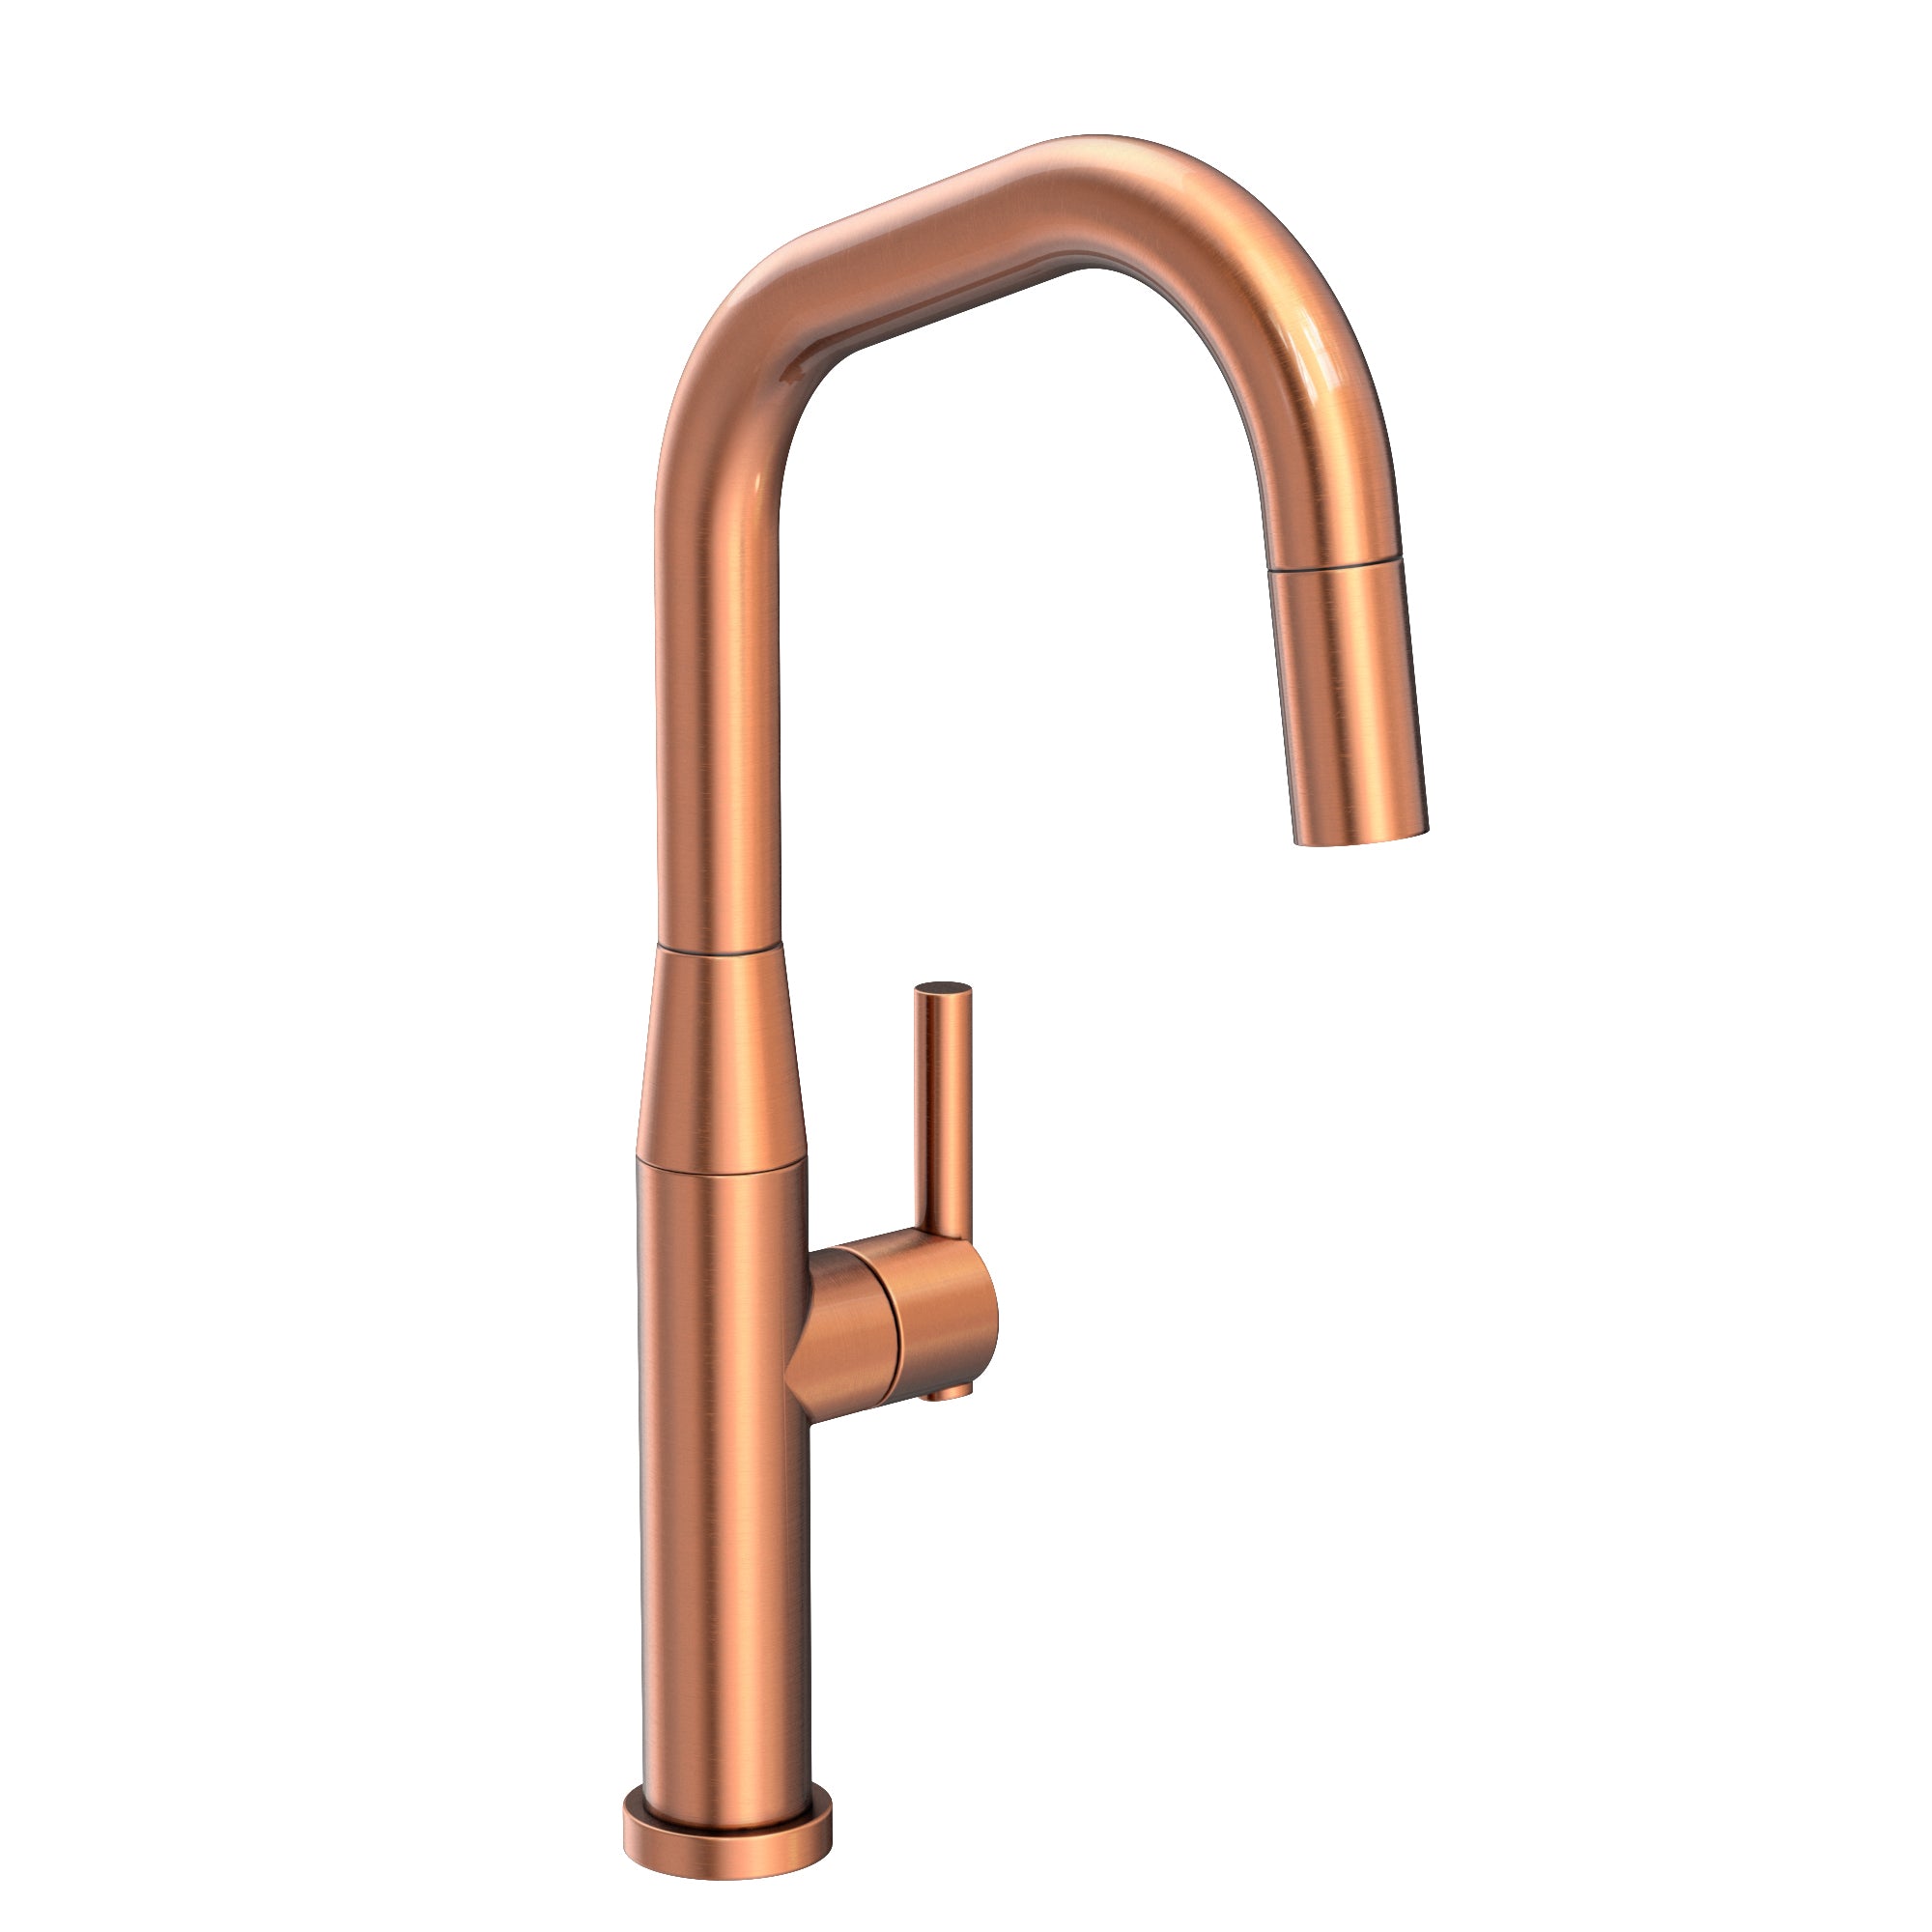 Newport Brass East Square Pull-down Kitchen Faucet